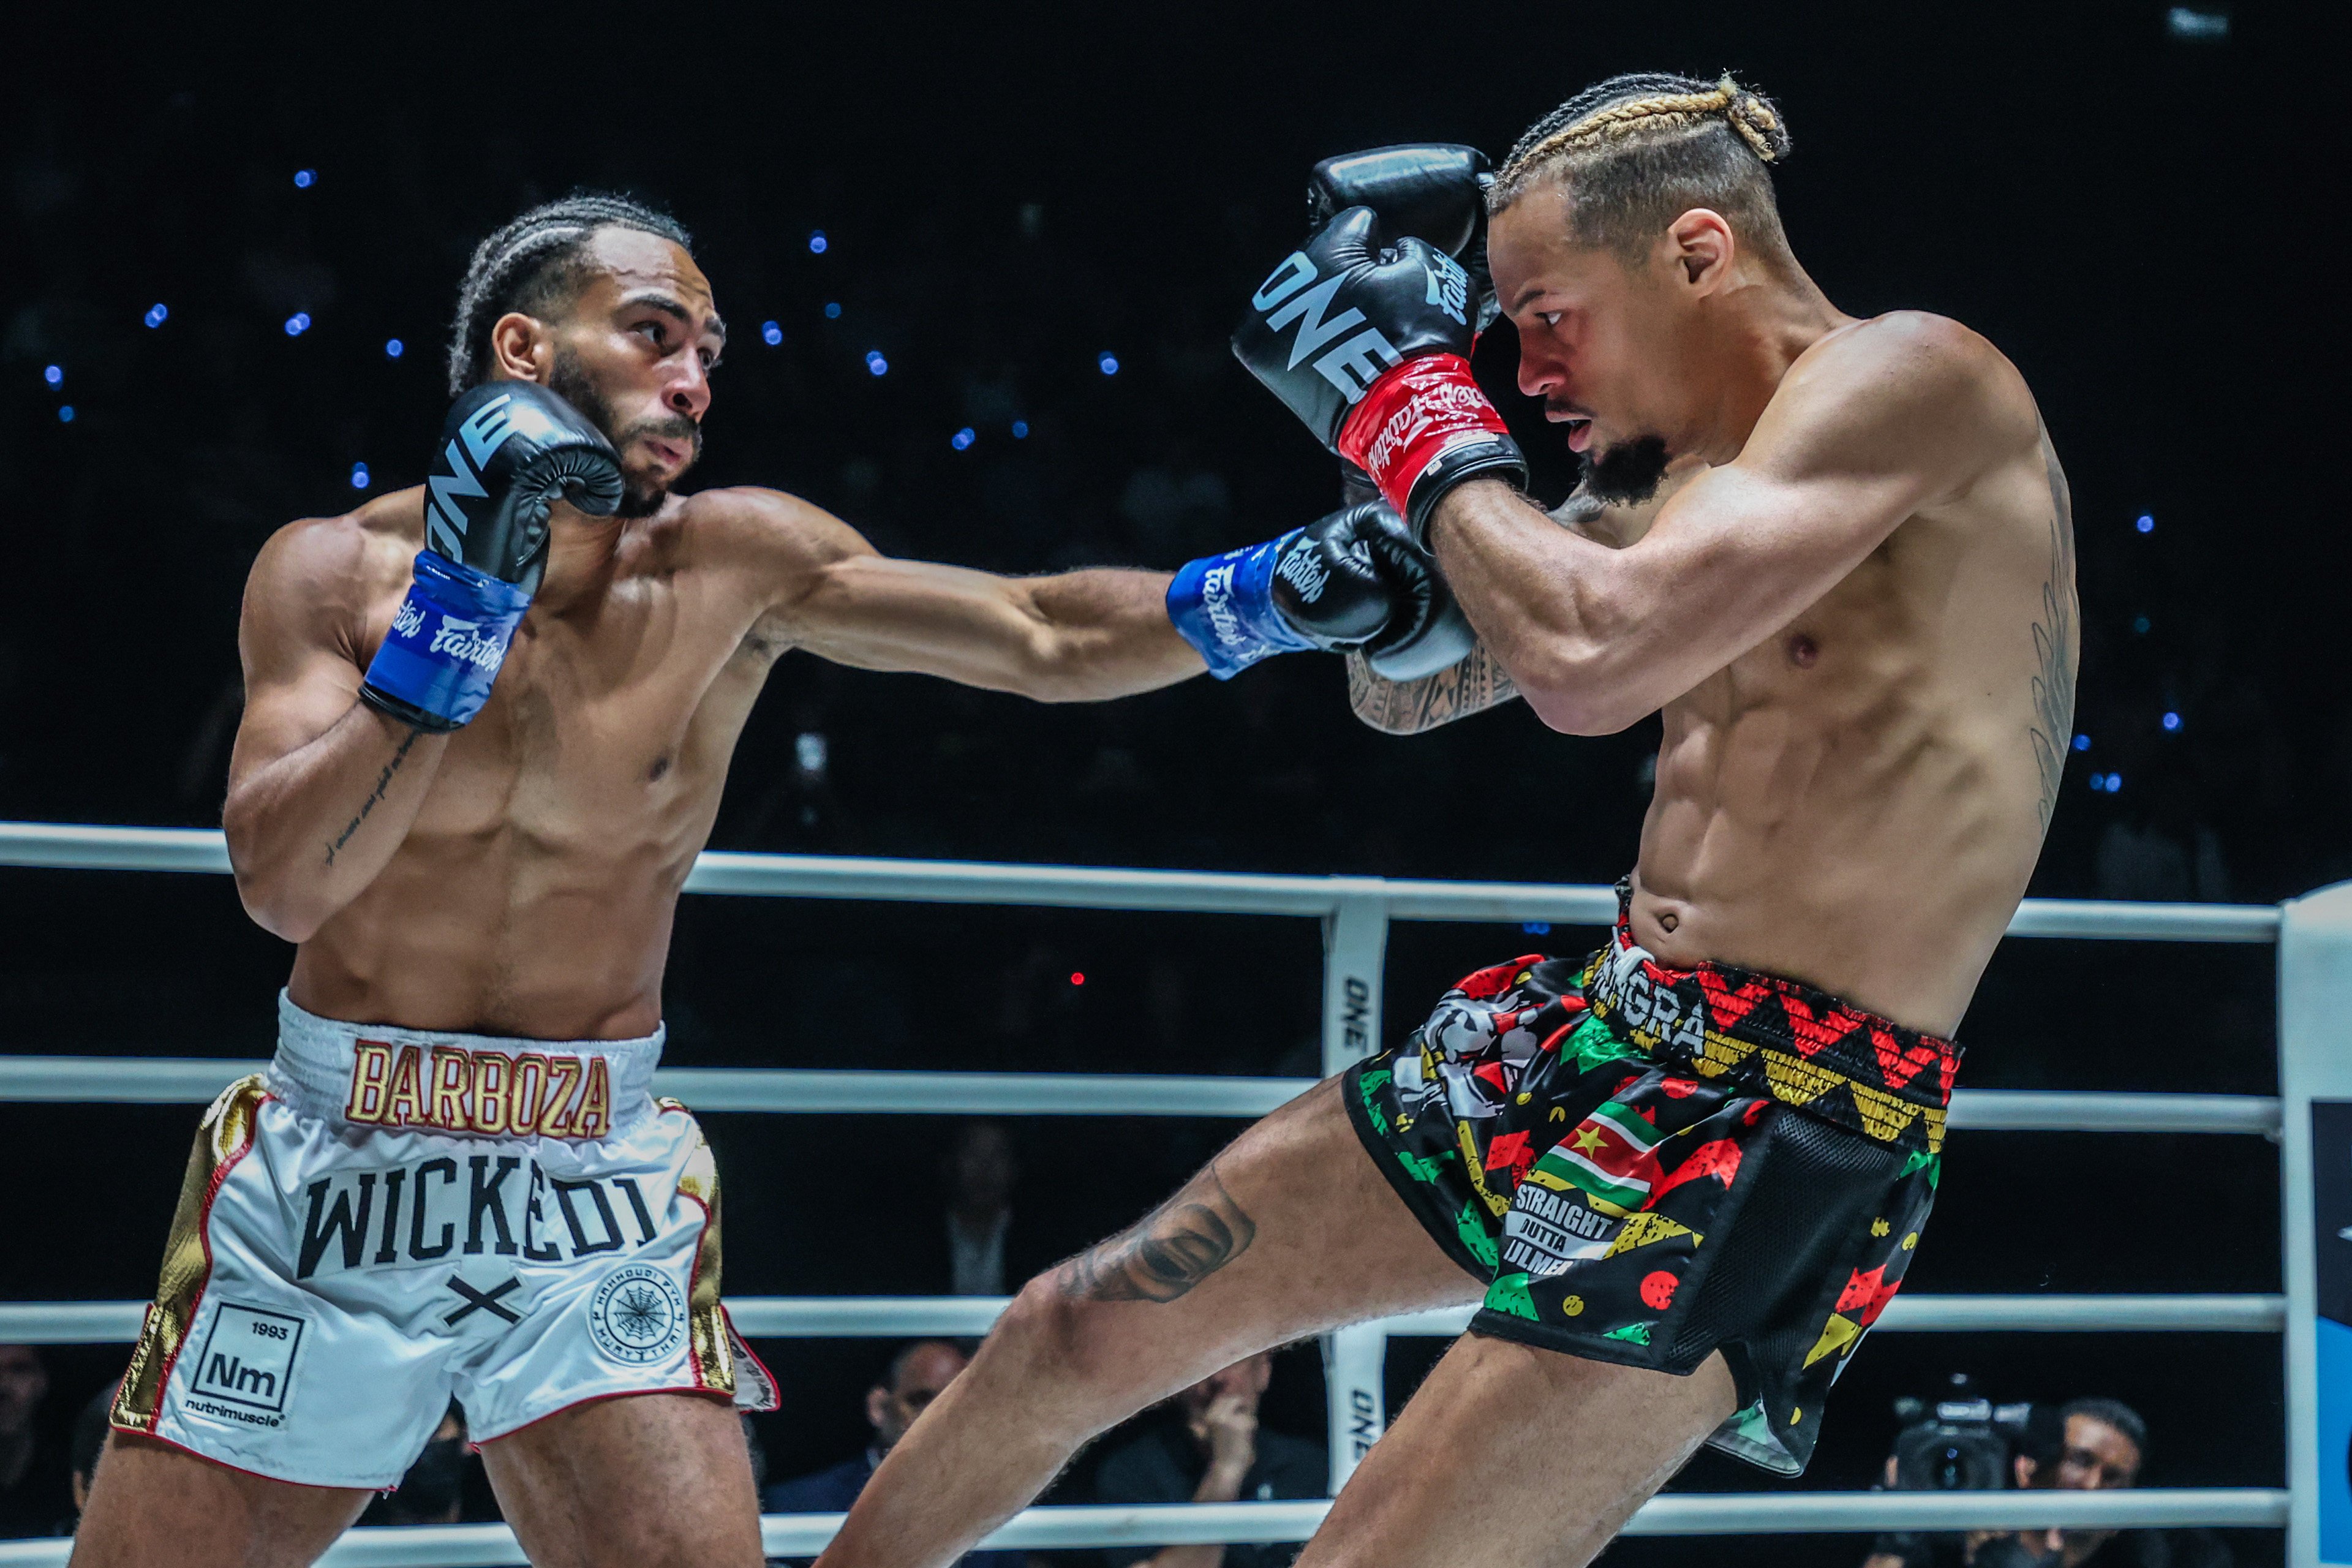 Alexis Nicolas throws a punch at Robin Eersel during their lightweight kickboxing title bout at ONE Fight Night 21. Photo: ONE Championship